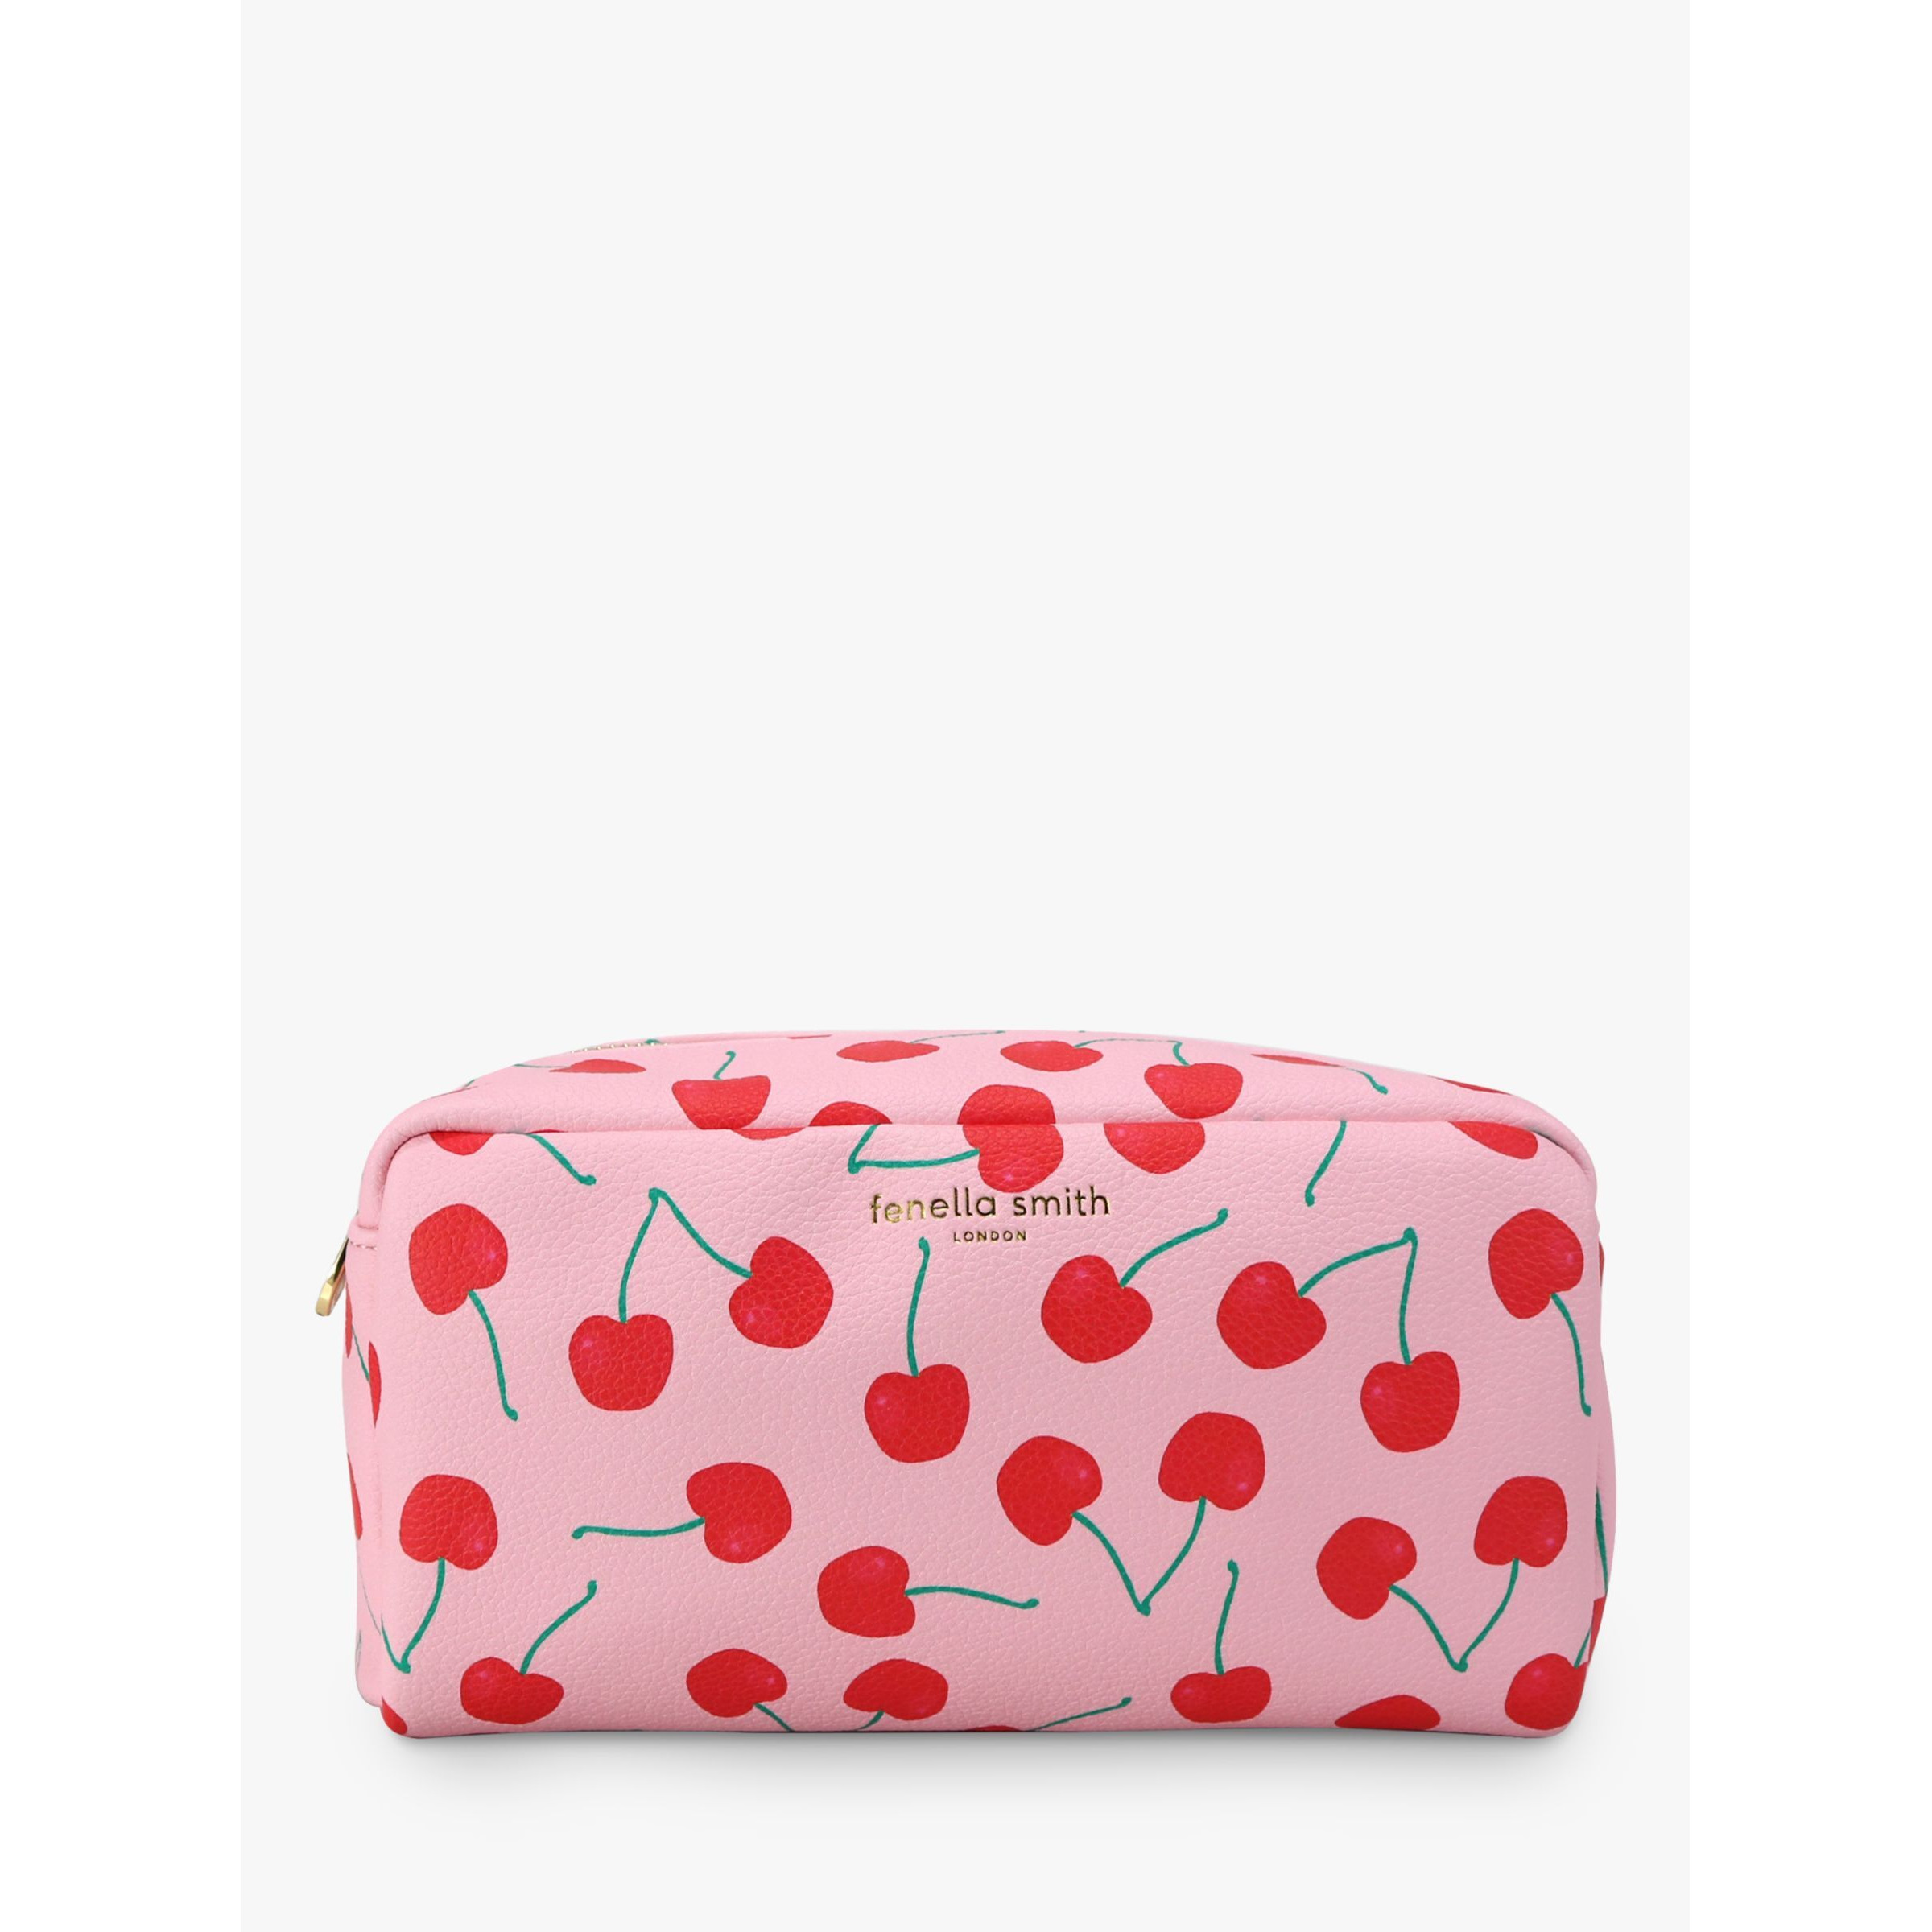 Fenella Smith Cherries Recycled Box Wash Bag, Pink - image 1